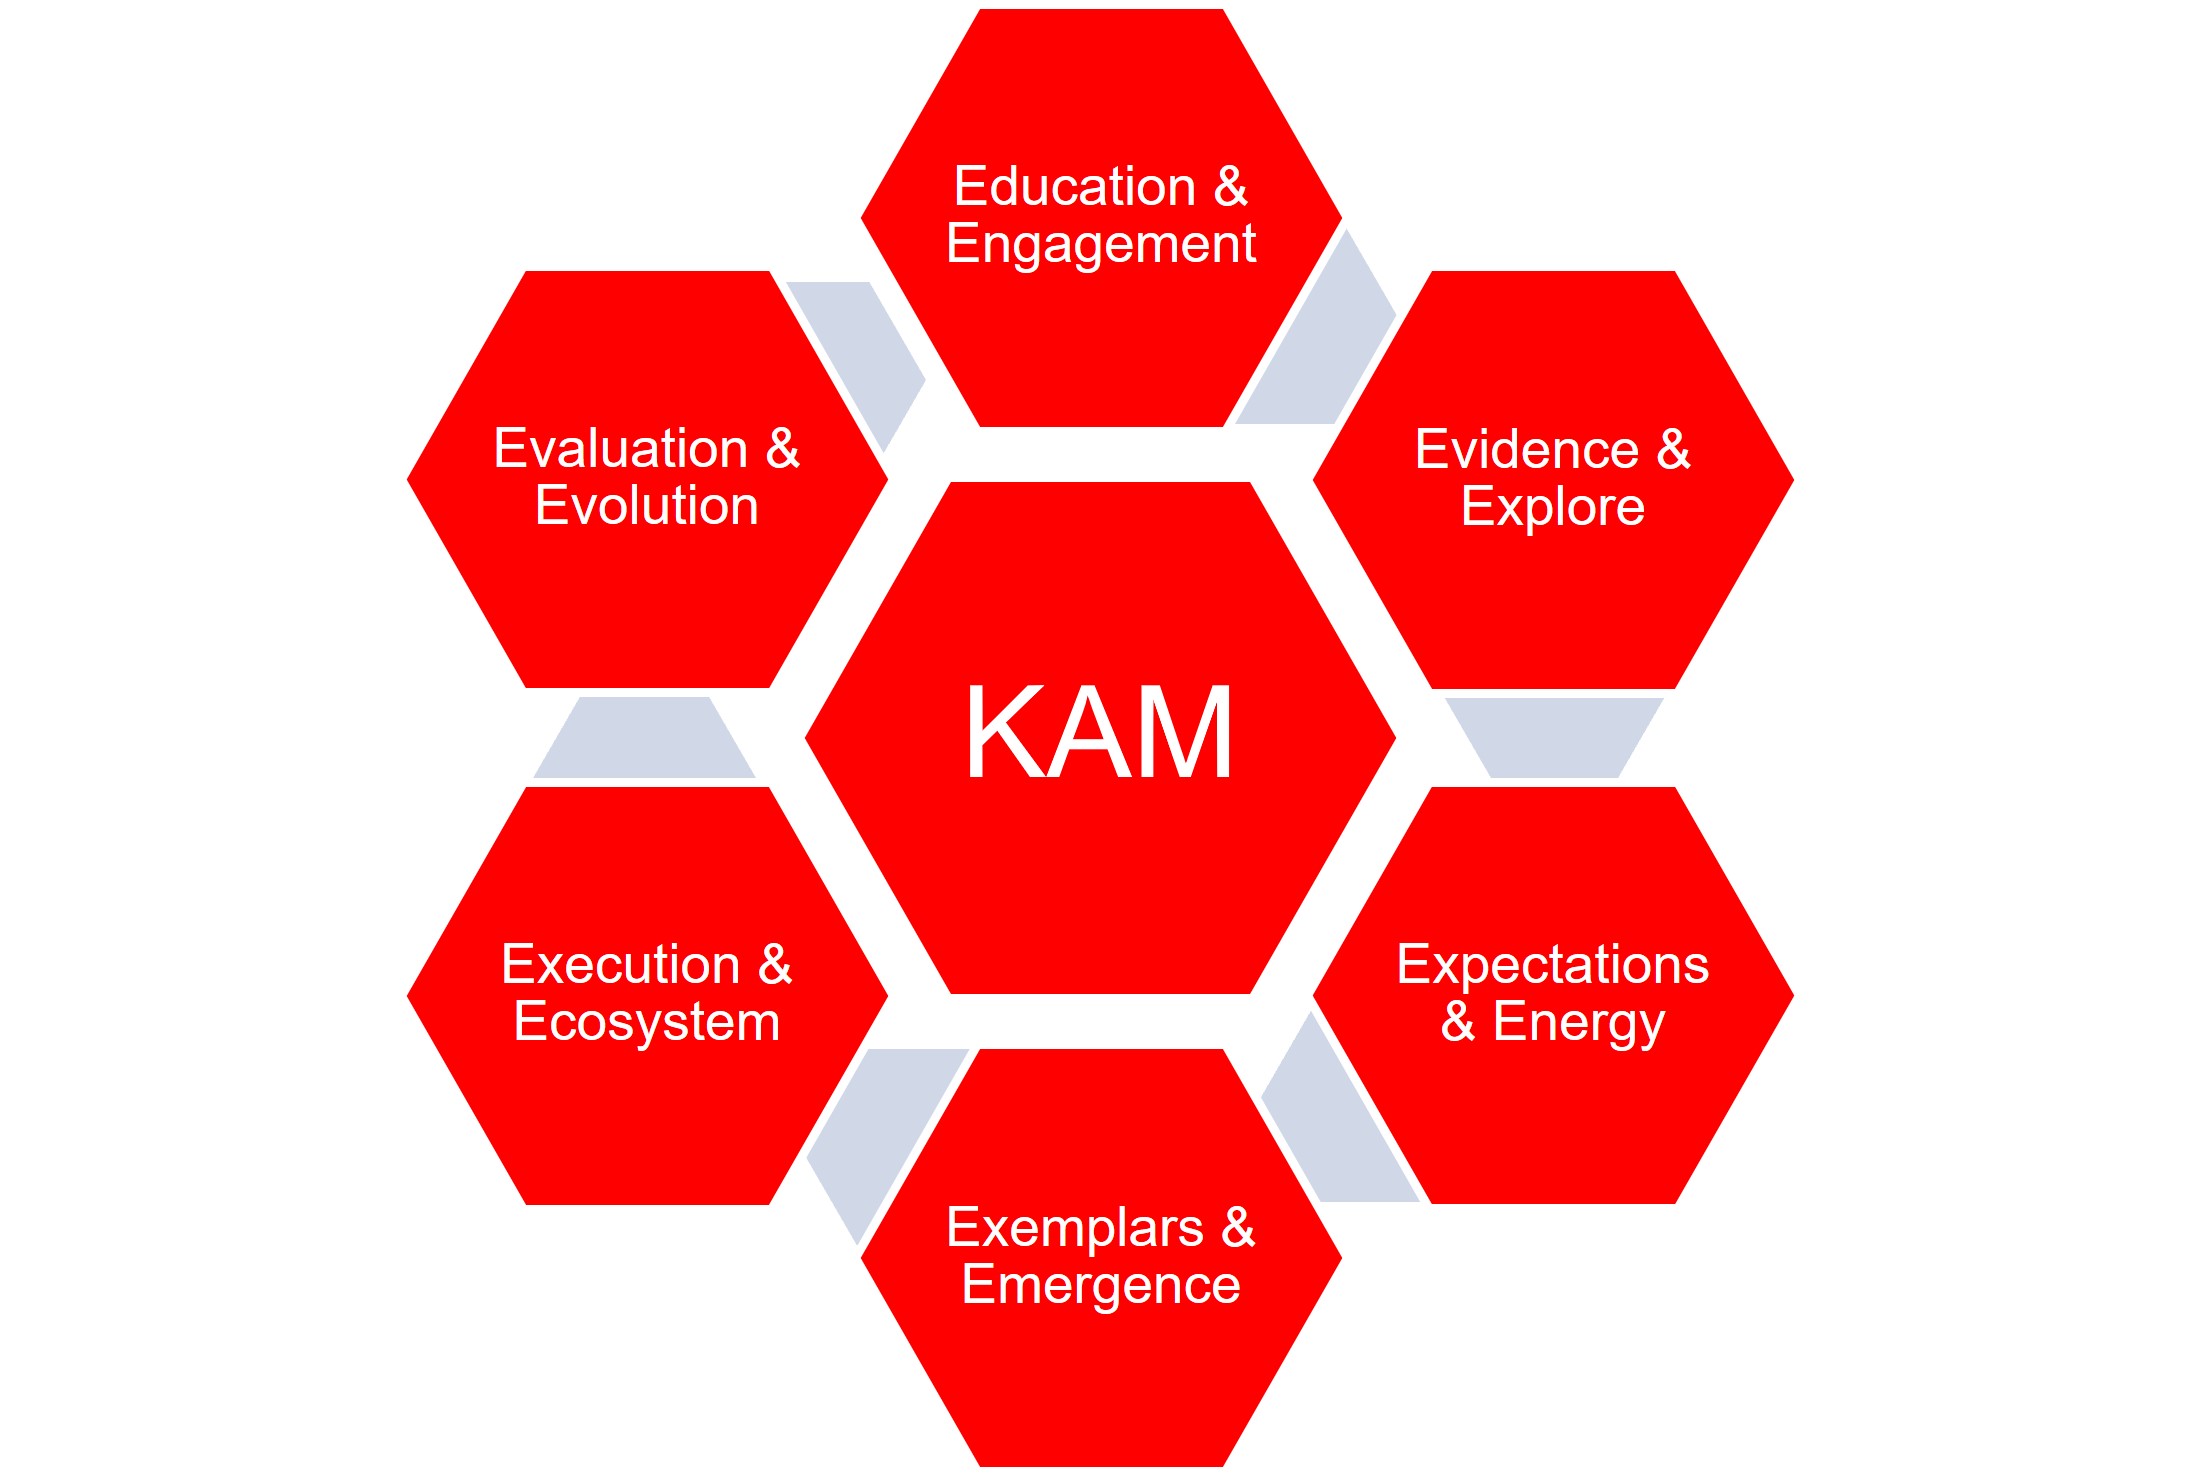 Key Account Management (KAM) – Research companies, use KAM technology and maintain momentum